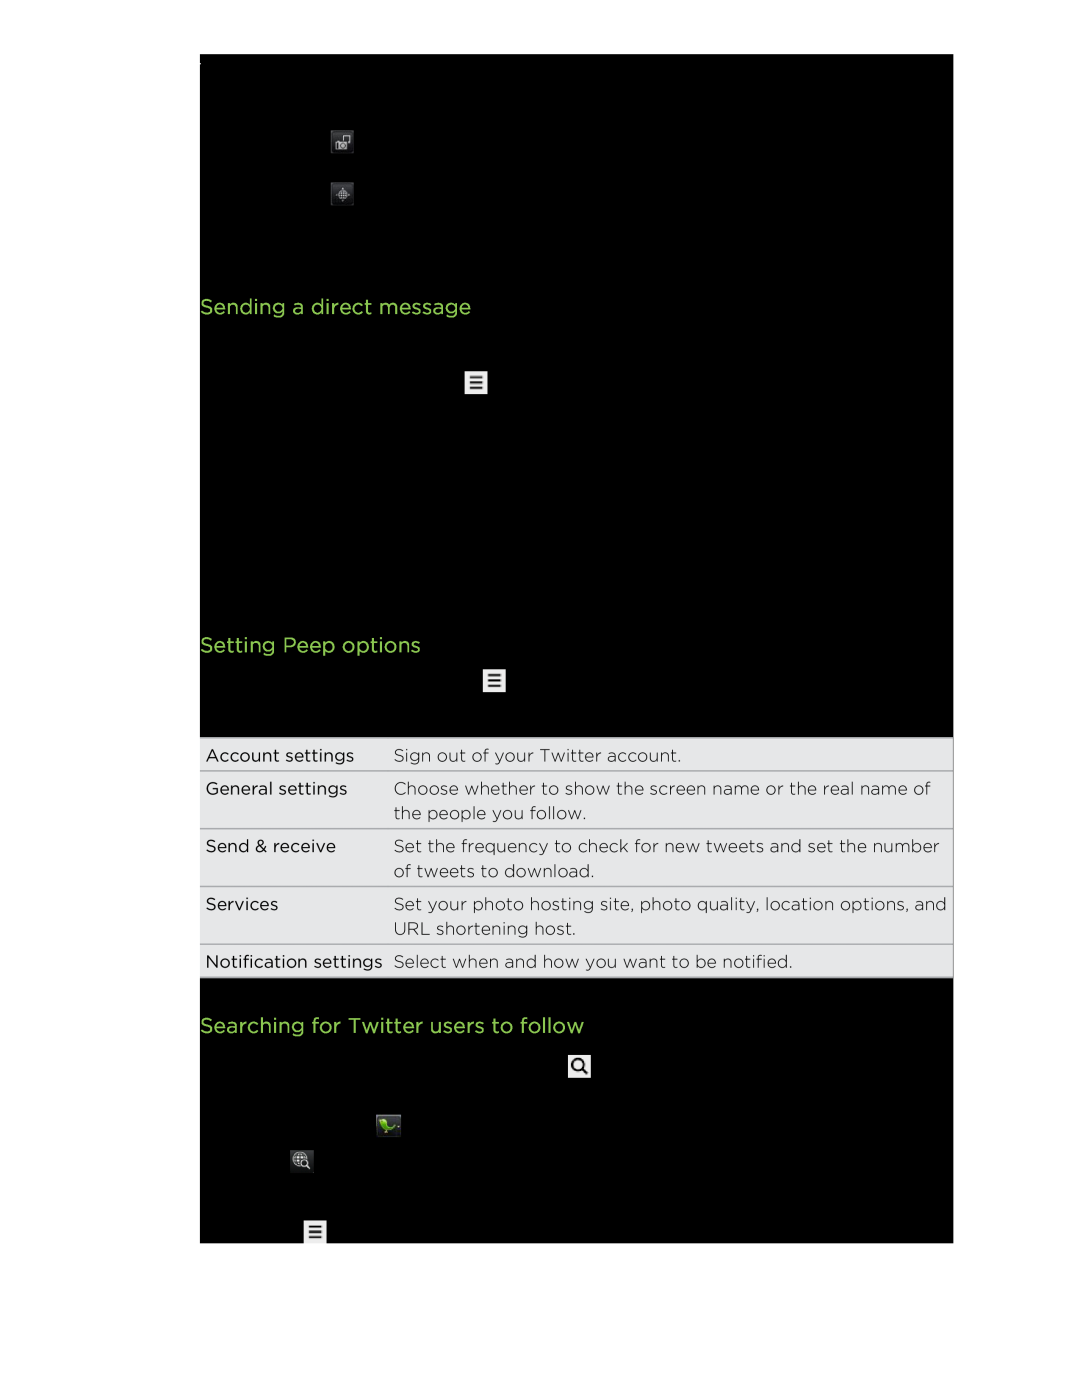 HTC manual Sending a direct message, Setting Peep options, Searching for Twitter users to follow 